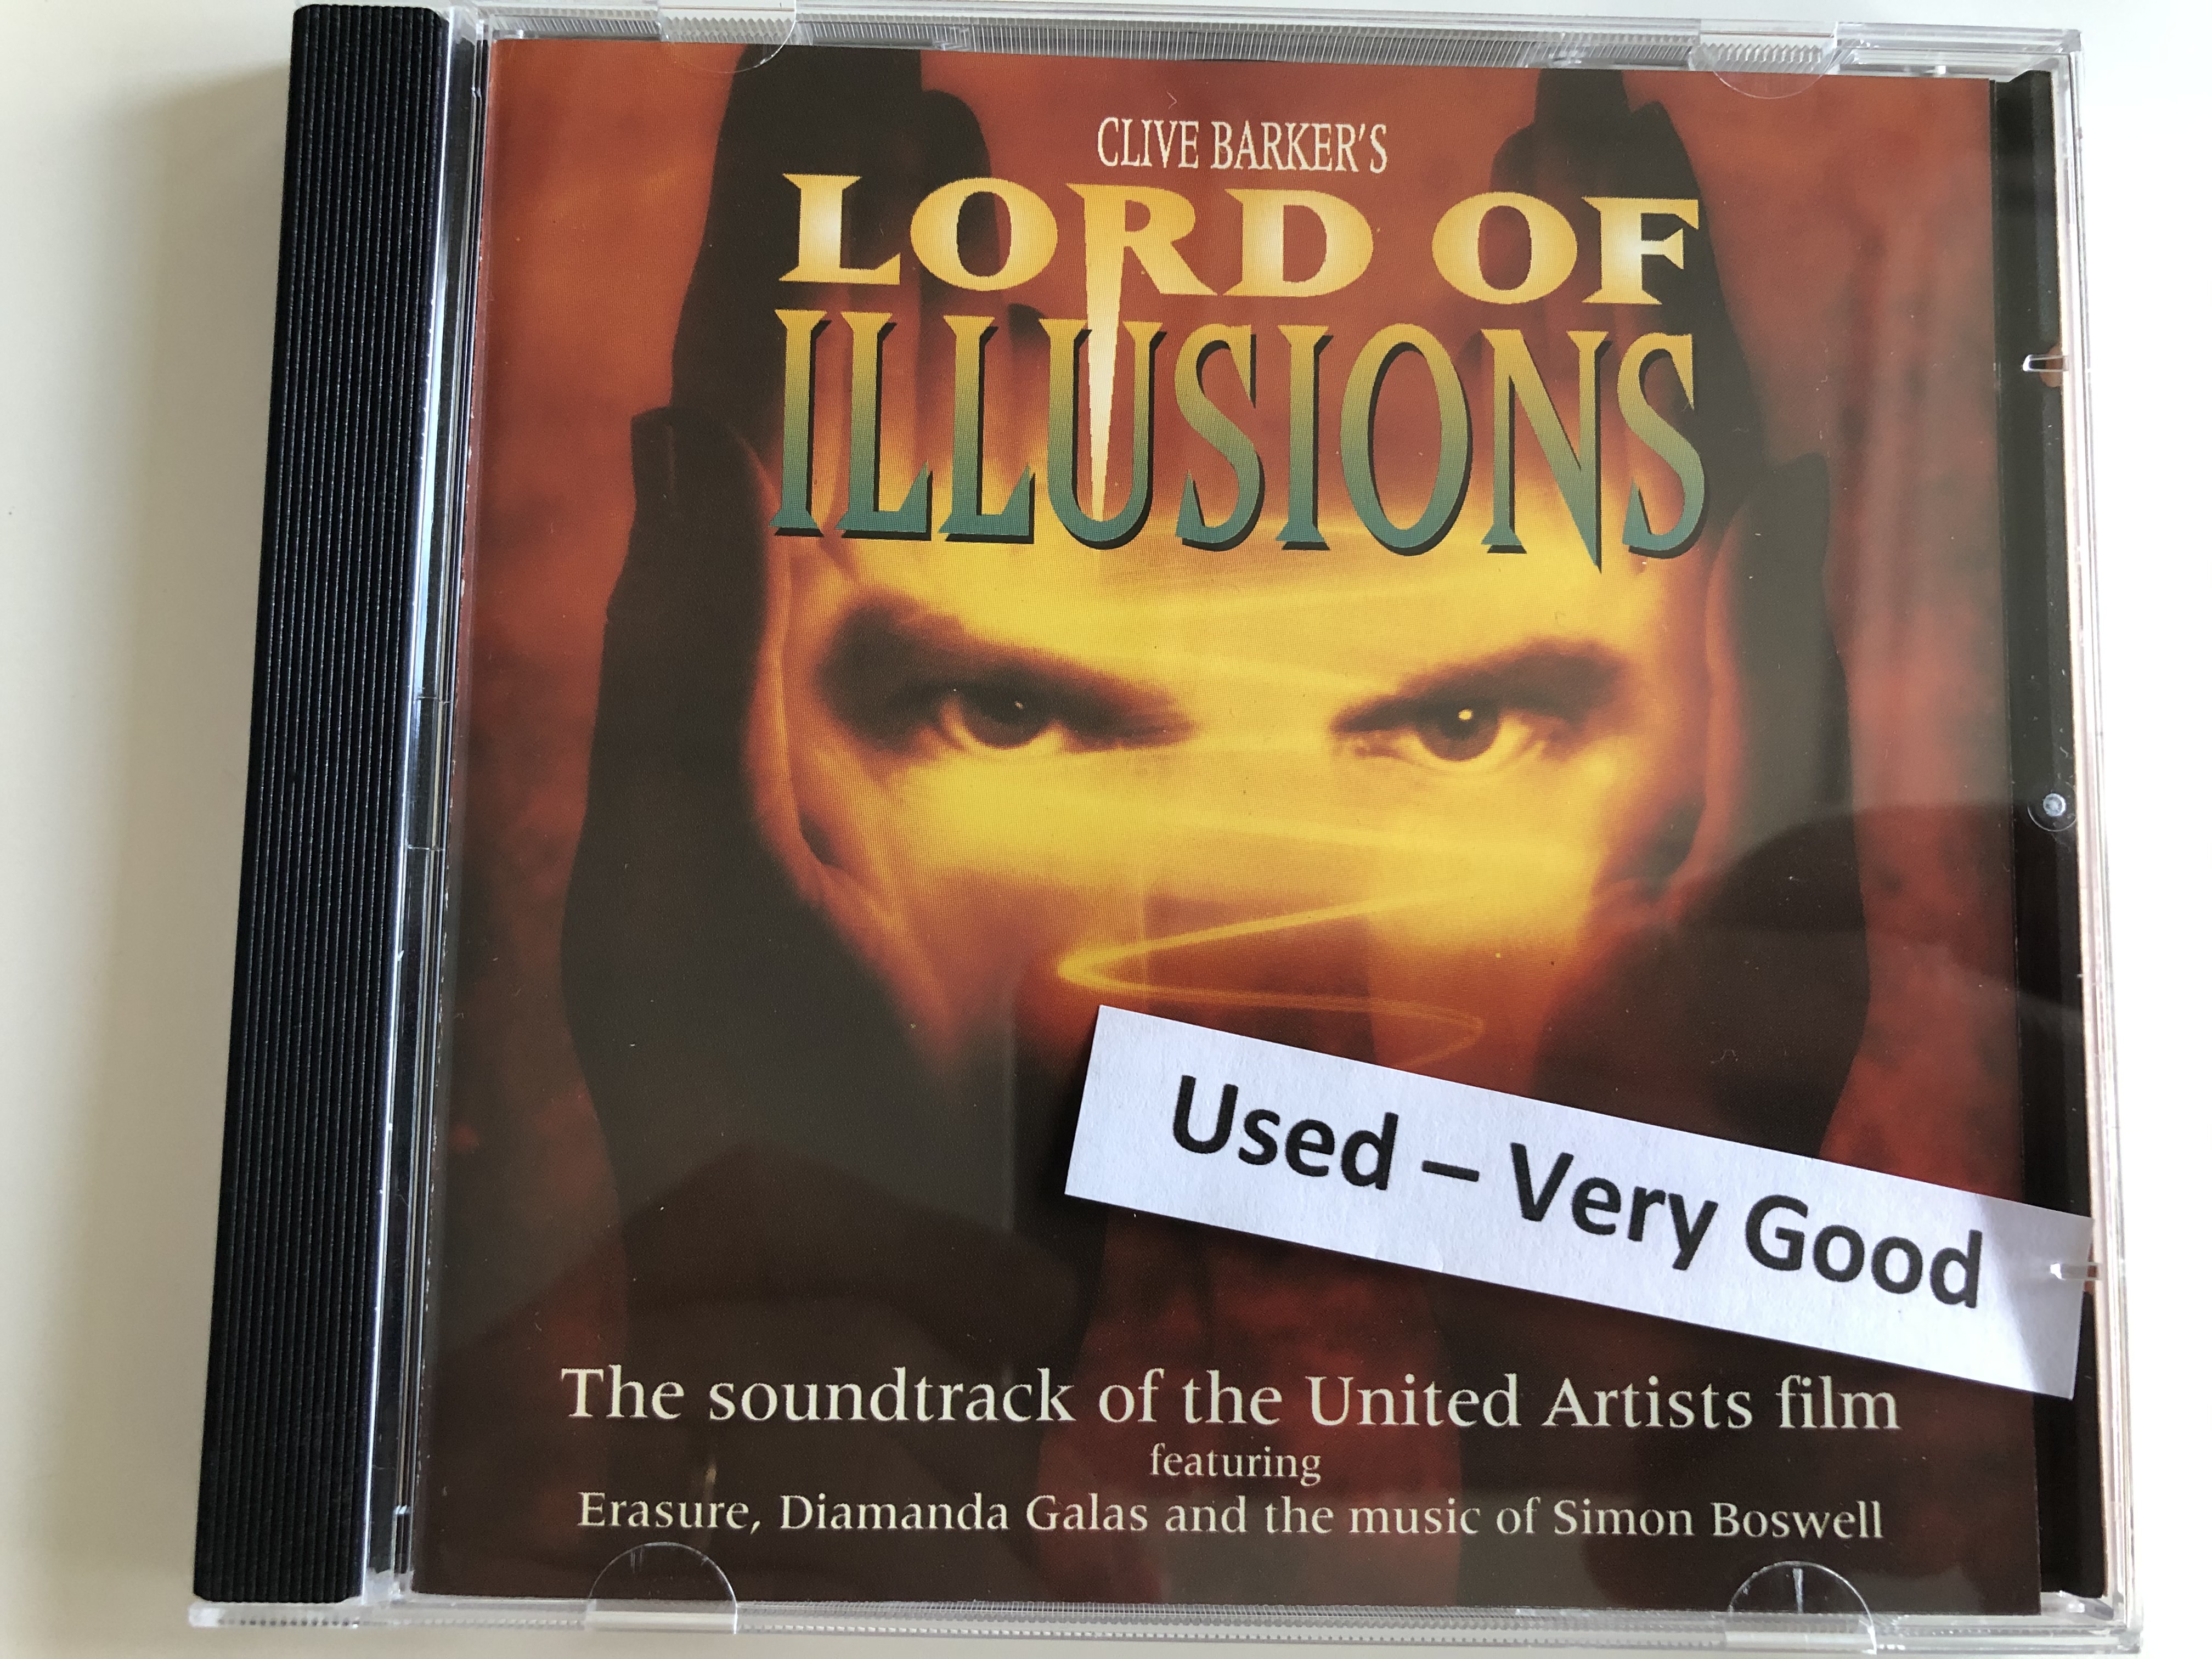 clive-barker-s-lord-of-illusions-the-soundtrack-of-the-united-artists-film-featuring-erasure-diamanda-galas-and-the-music-of-simon-boswell-mute-audio-cd-1995-ionic-13cd-6-.jpg